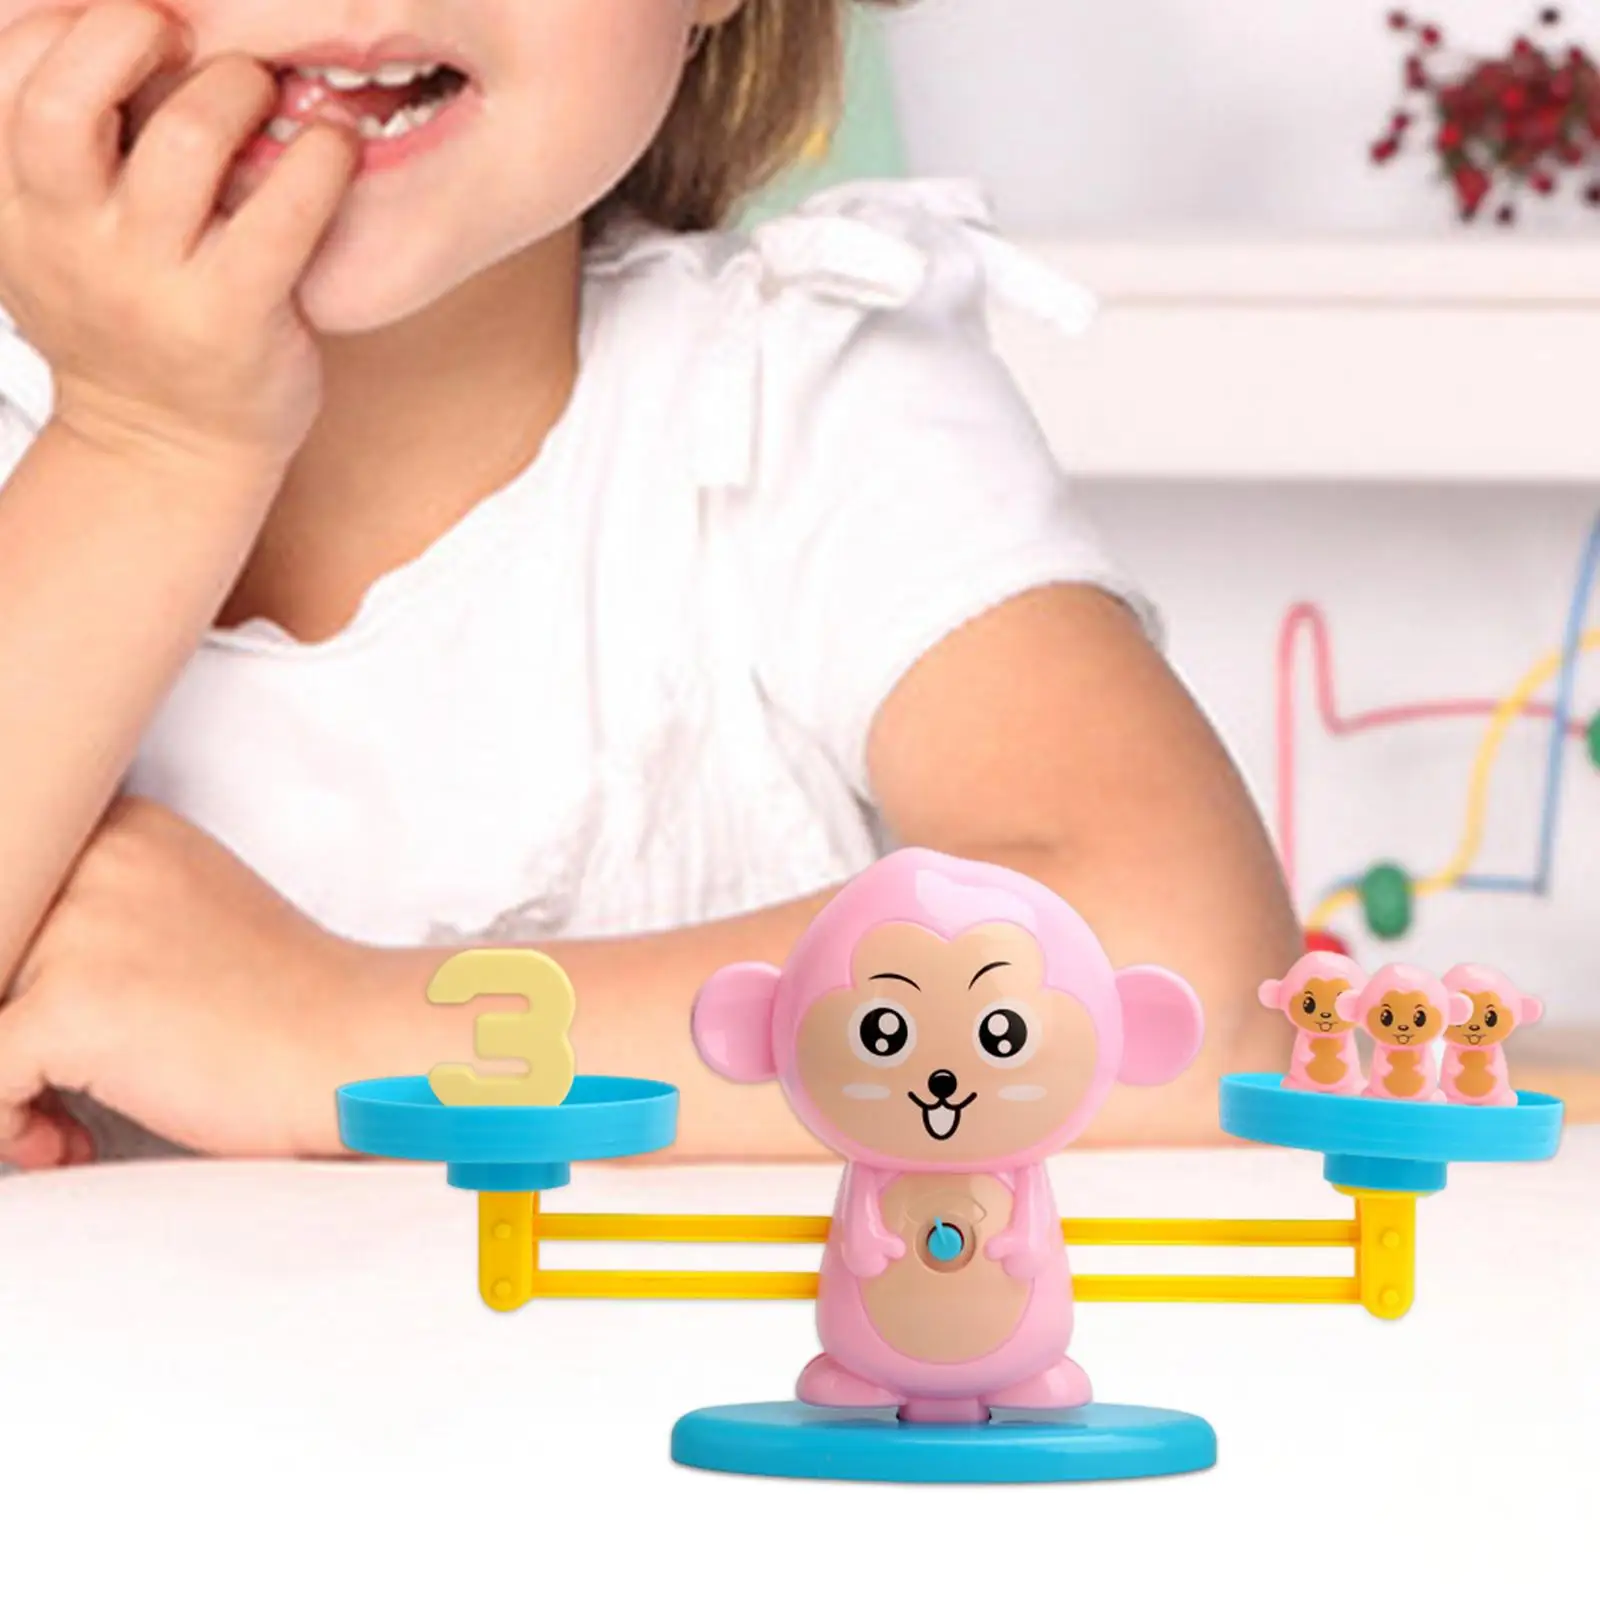 Balance Game Toy Toddler Educational Toys Children`s Birthday Gifts Balance Counting games Preschool Kids Boy Girl